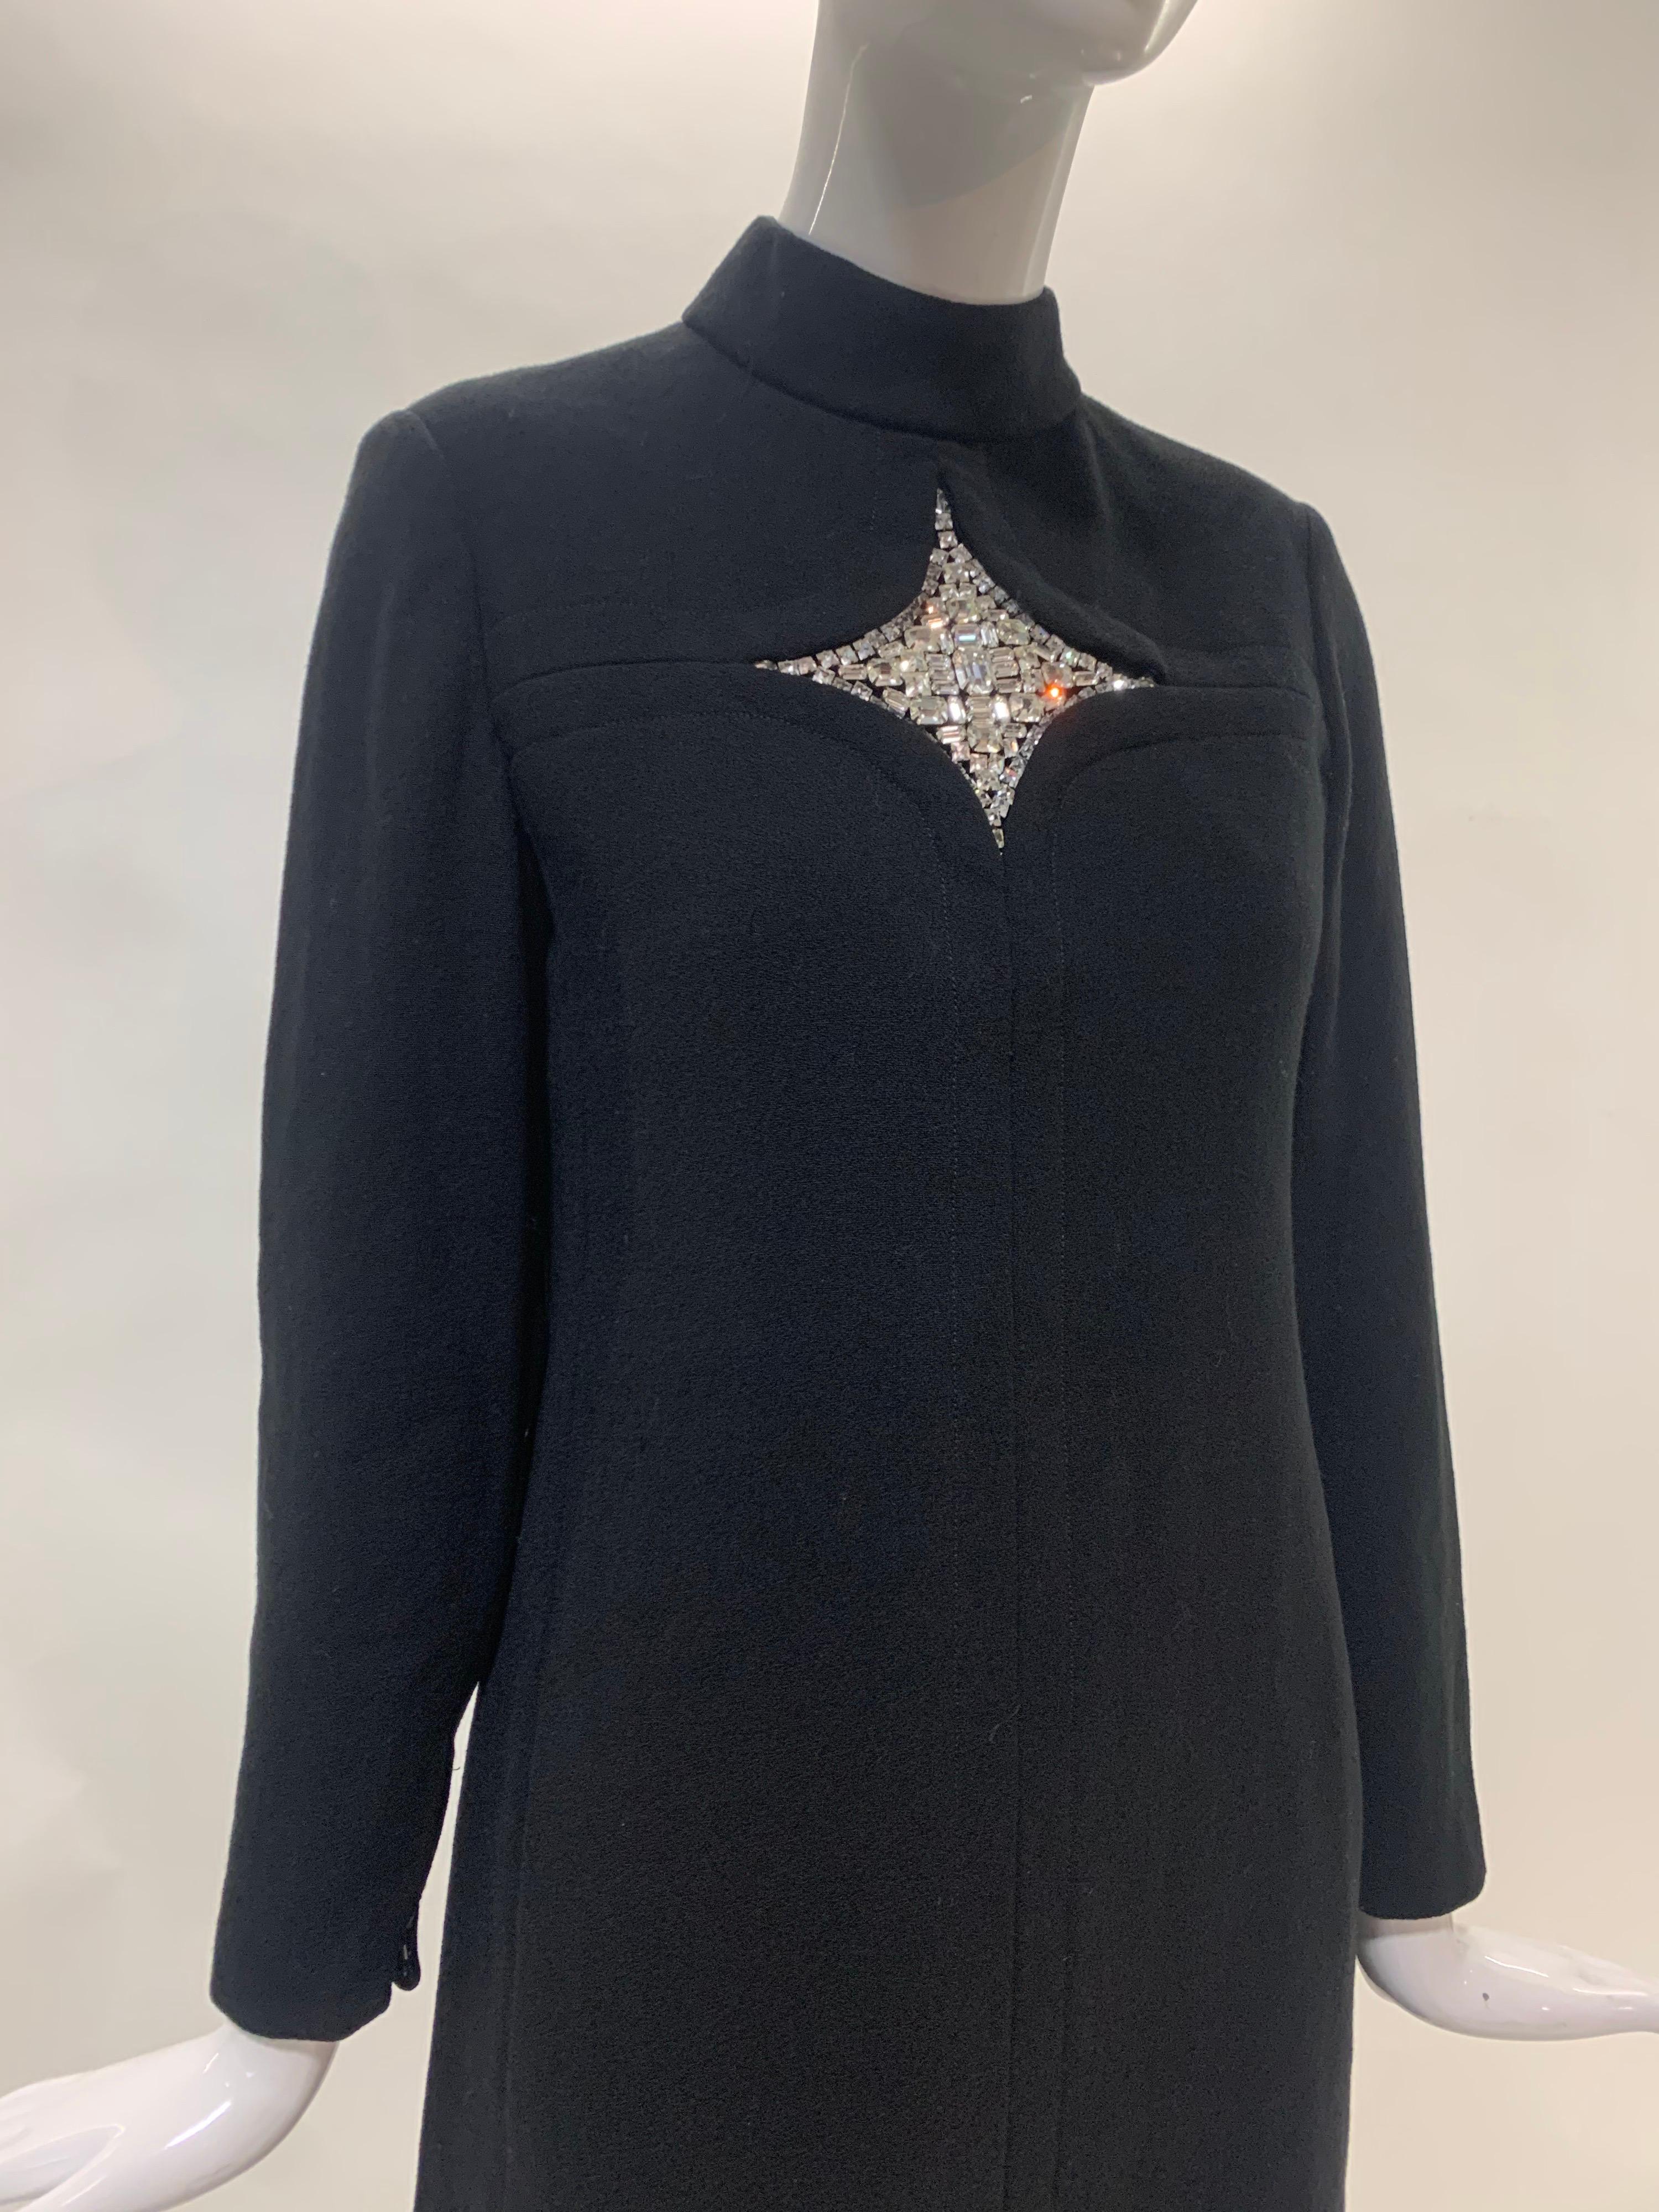 Black 1960s Mod Wool Crepe Tailored Cocktail Dress w/ Rhinestone Star Inset at Center For Sale